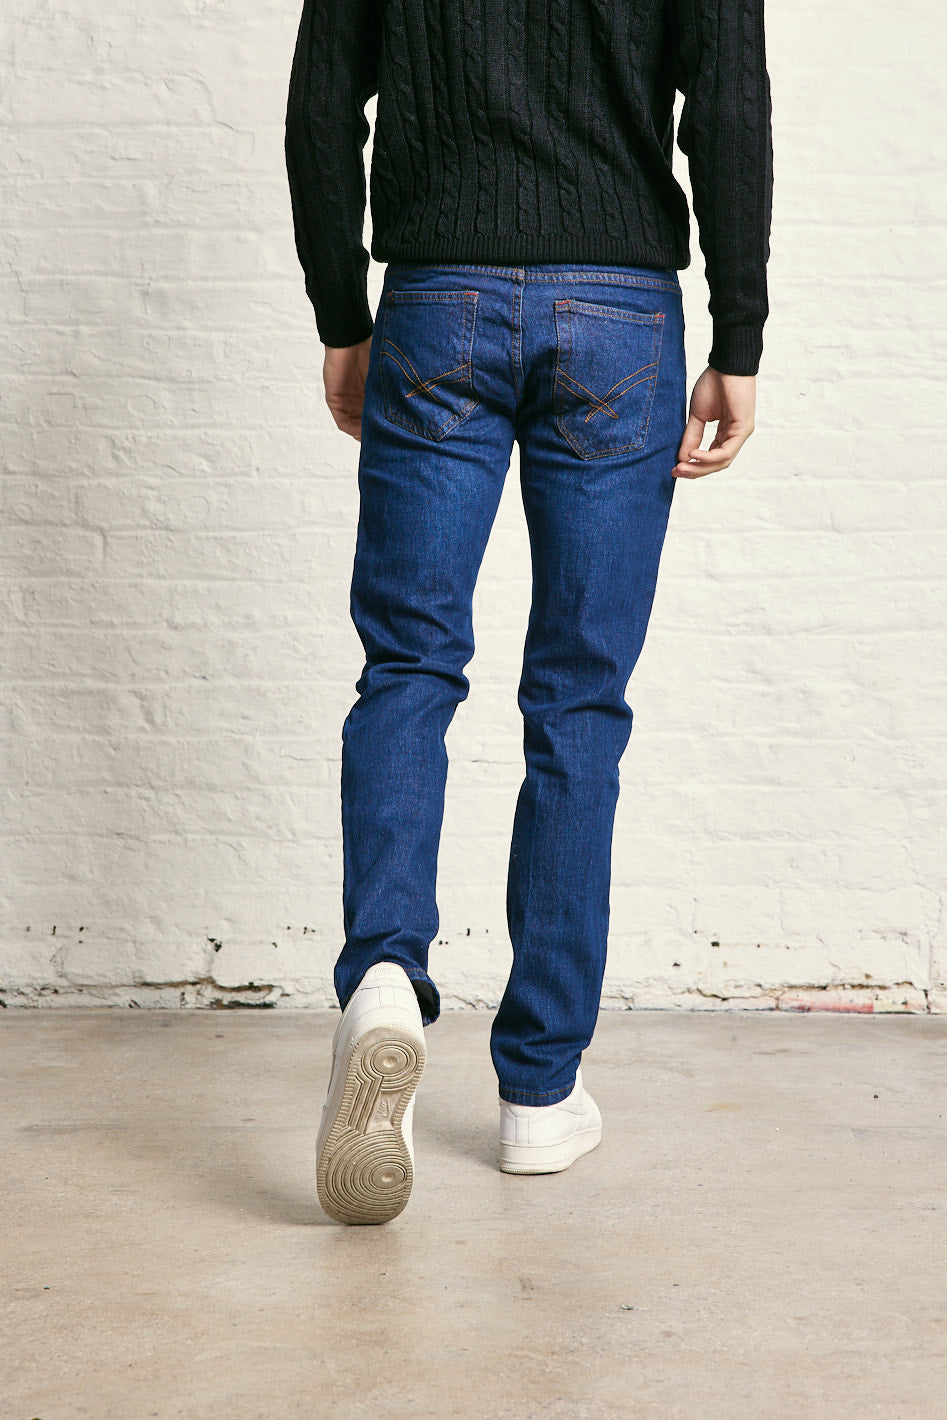 IN Straight Denim Jeans - Shop 2 for £35